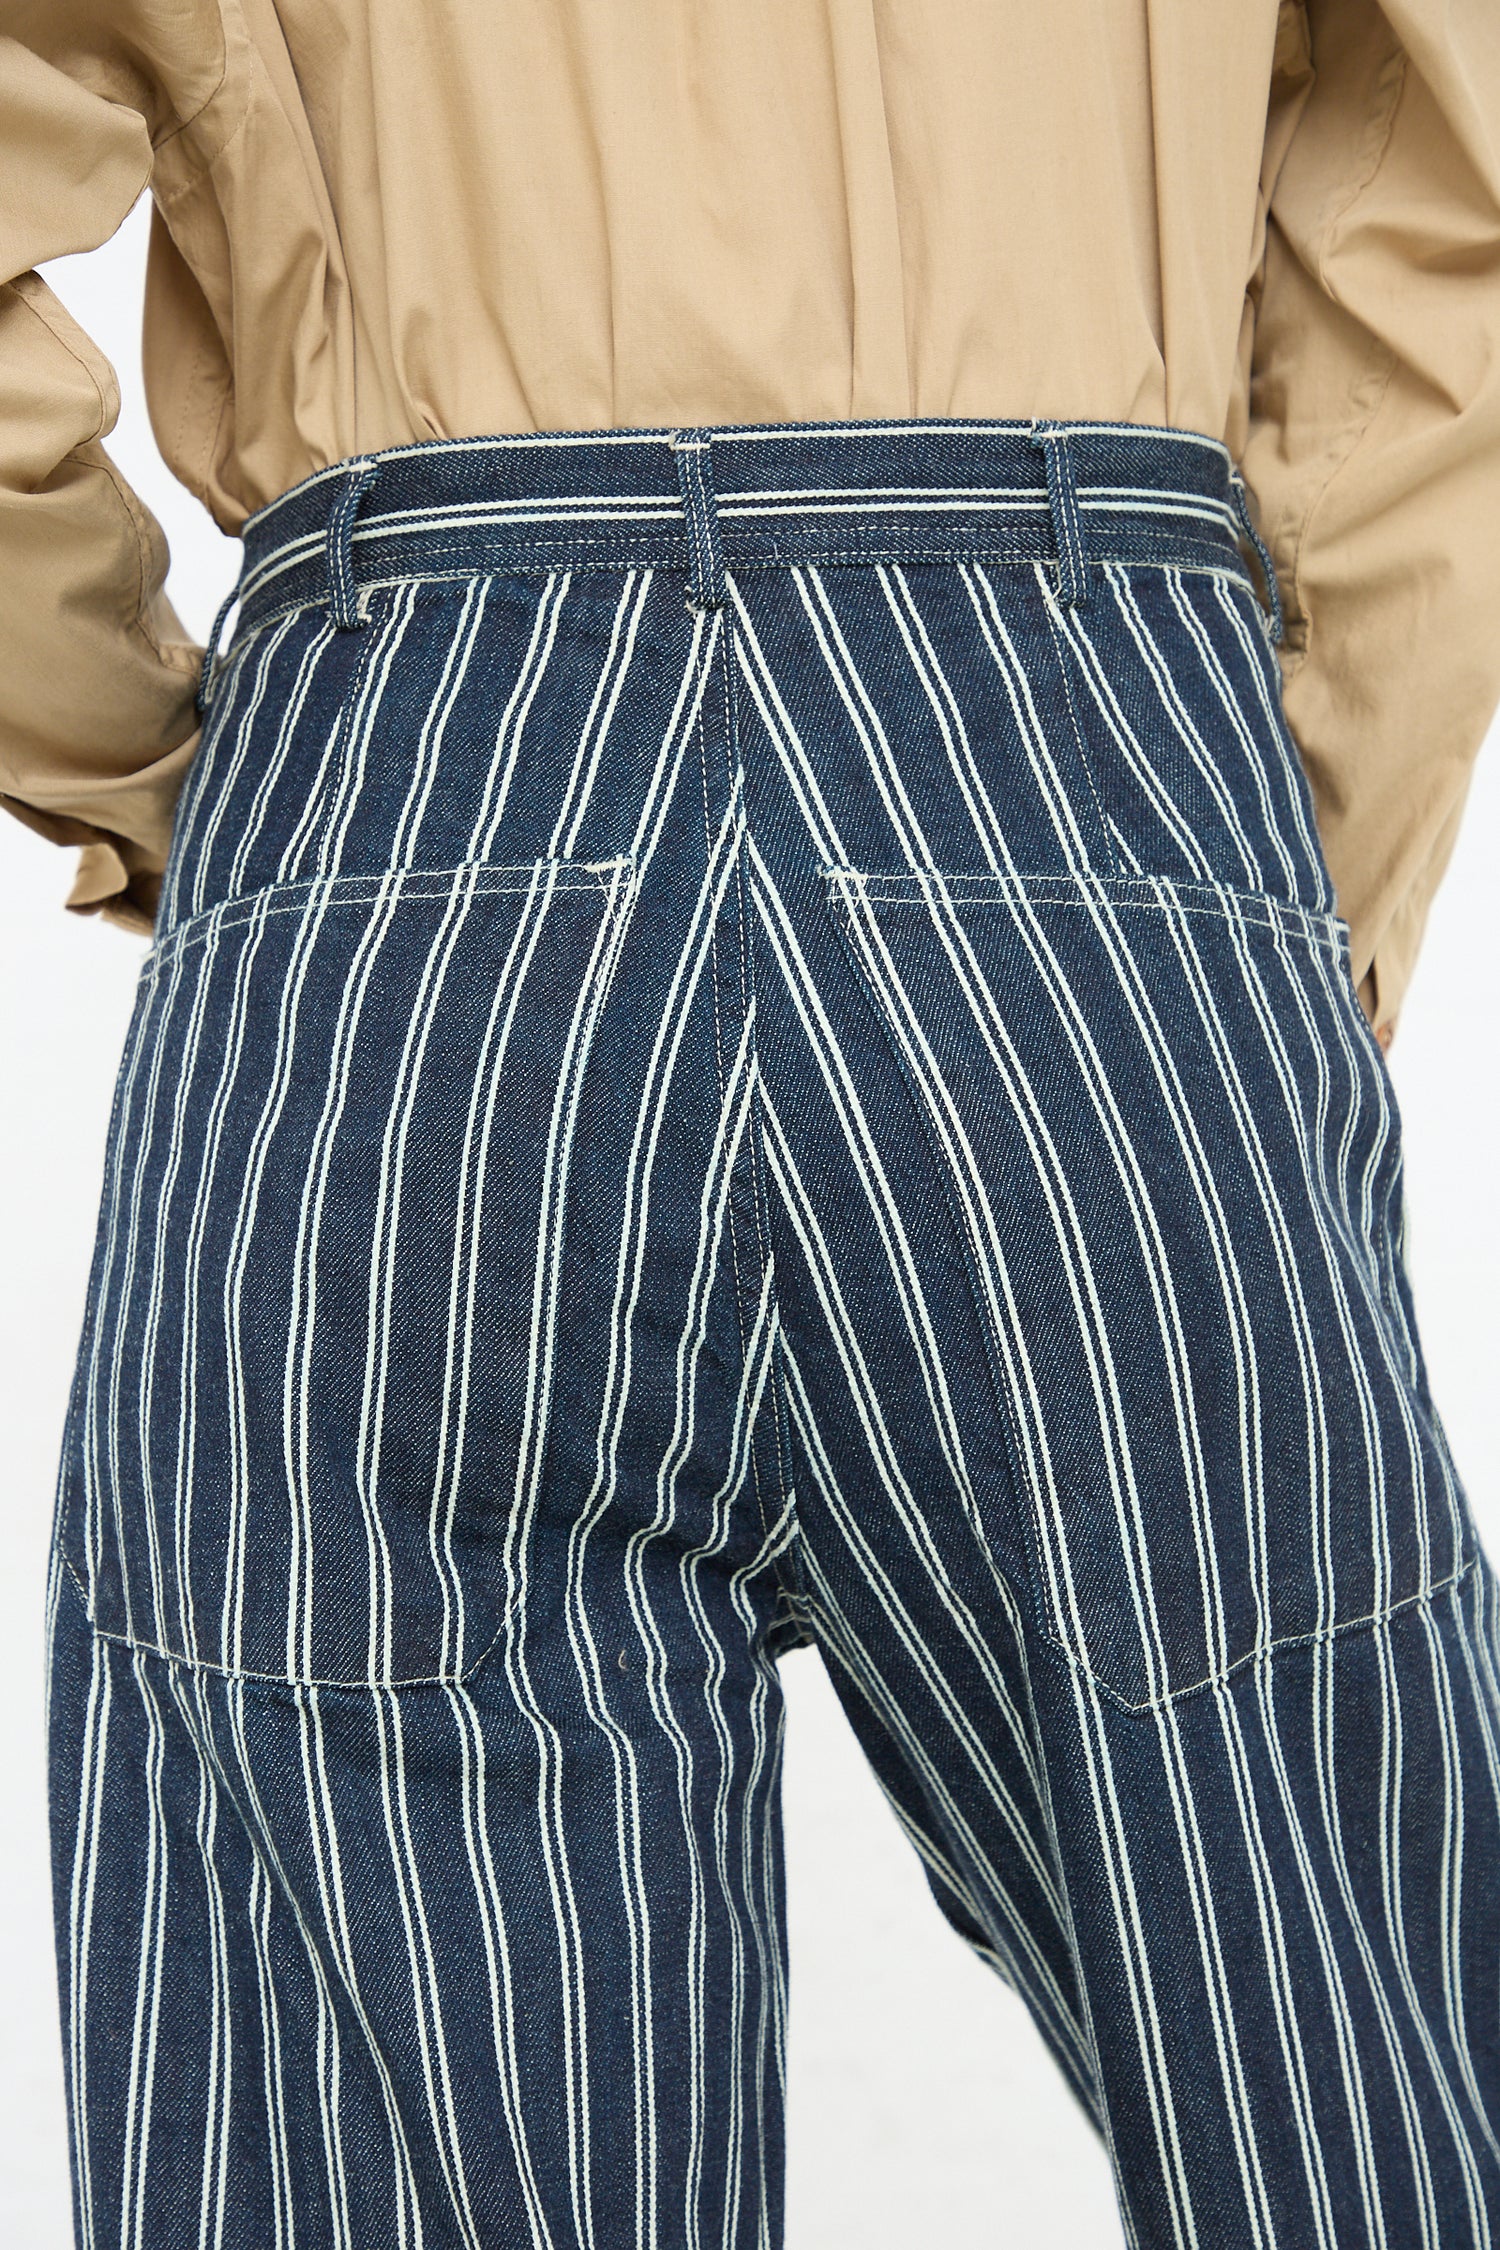 A close-up view of a person from behind, wearing As Ever's Brancusi Pant in Indigo Denim Stripe and a beige shirt.